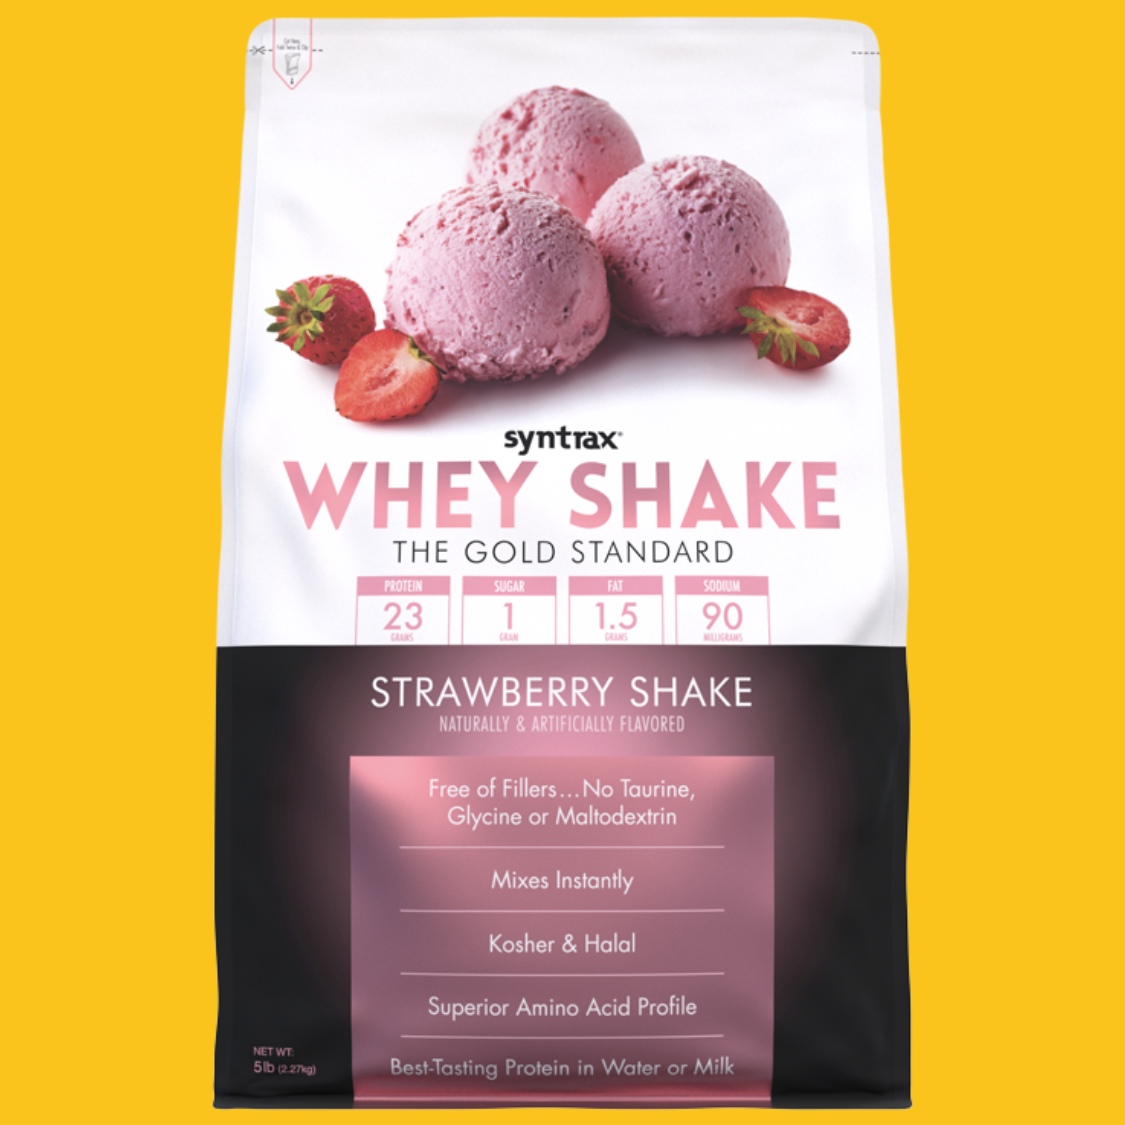 WHEY SHAKE THE NEW GOLD STANDARD 5 LBS SYNTRAX